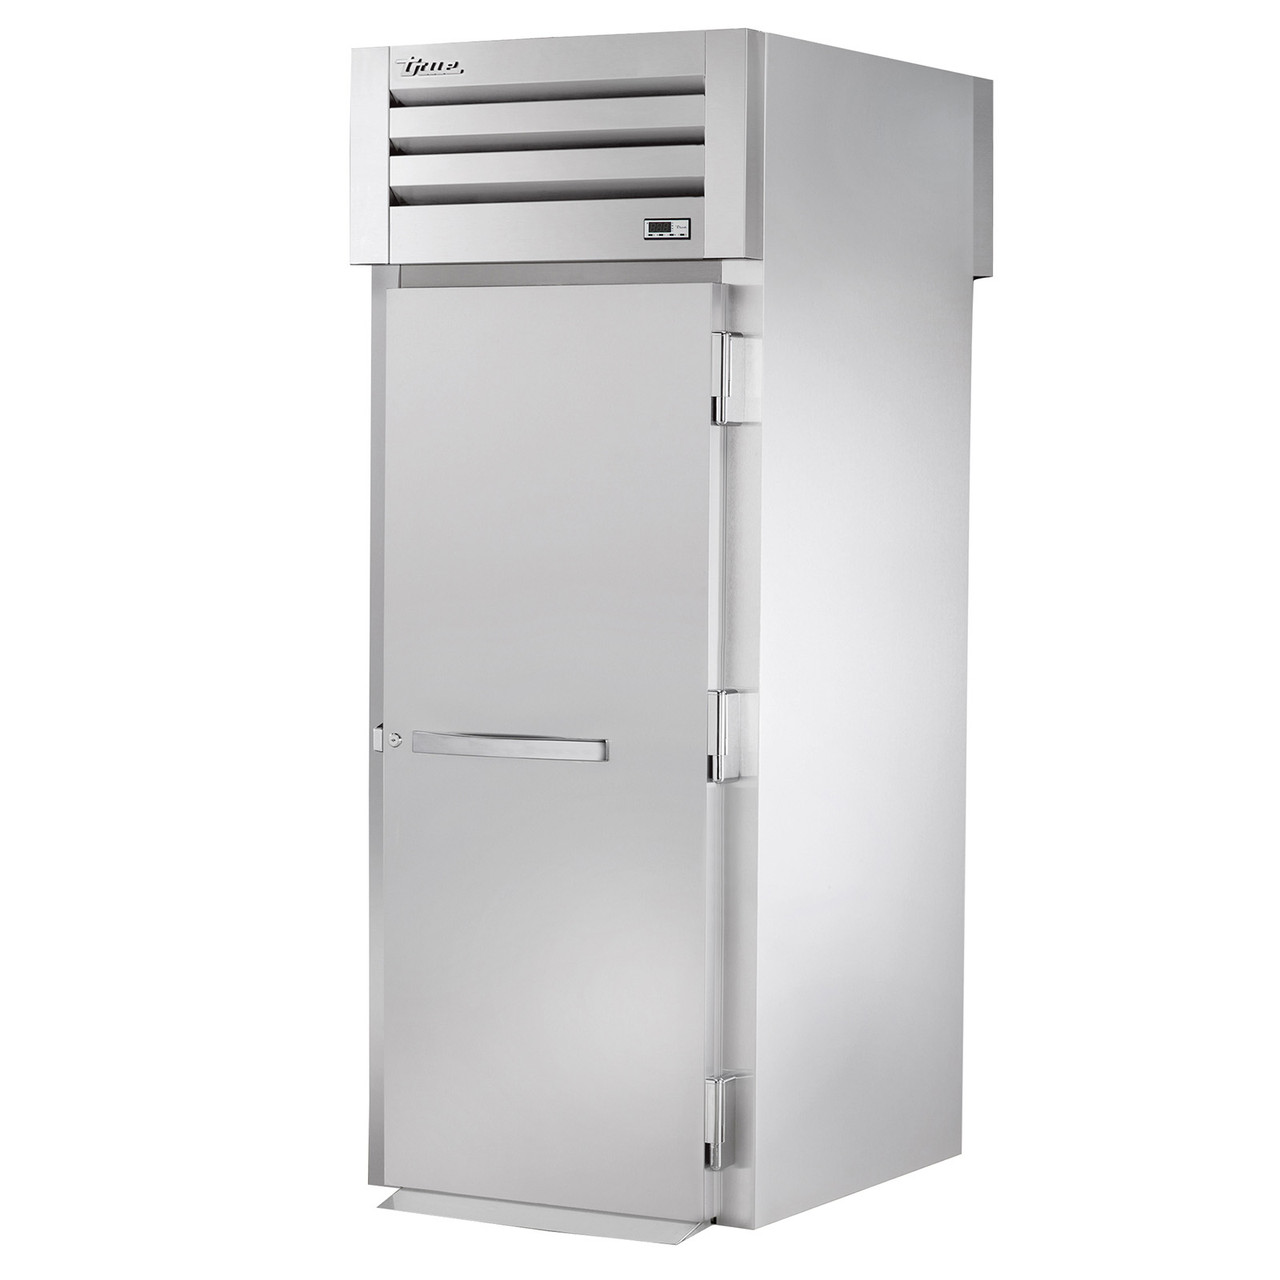 True Manufacturing STR1RRT-1S-1S Spec Series 1 Section Roll Thru Refrigerator with Solid Doors - All Stainless